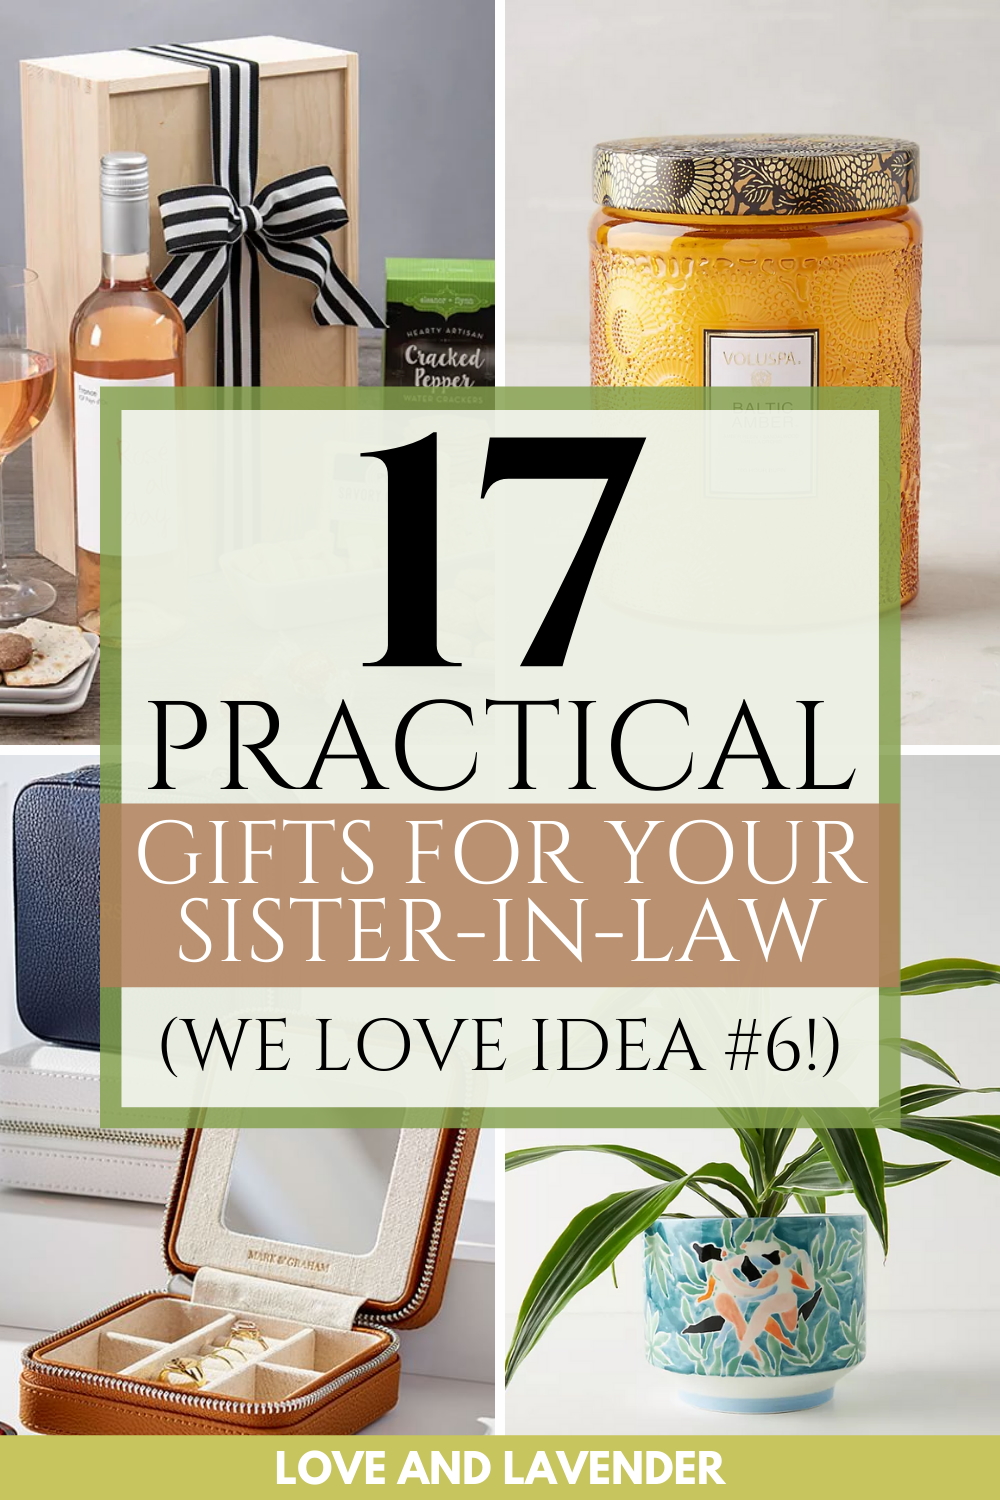 17 Practical Gifts for Your Sister-in-Law (We Love Idea #6!)